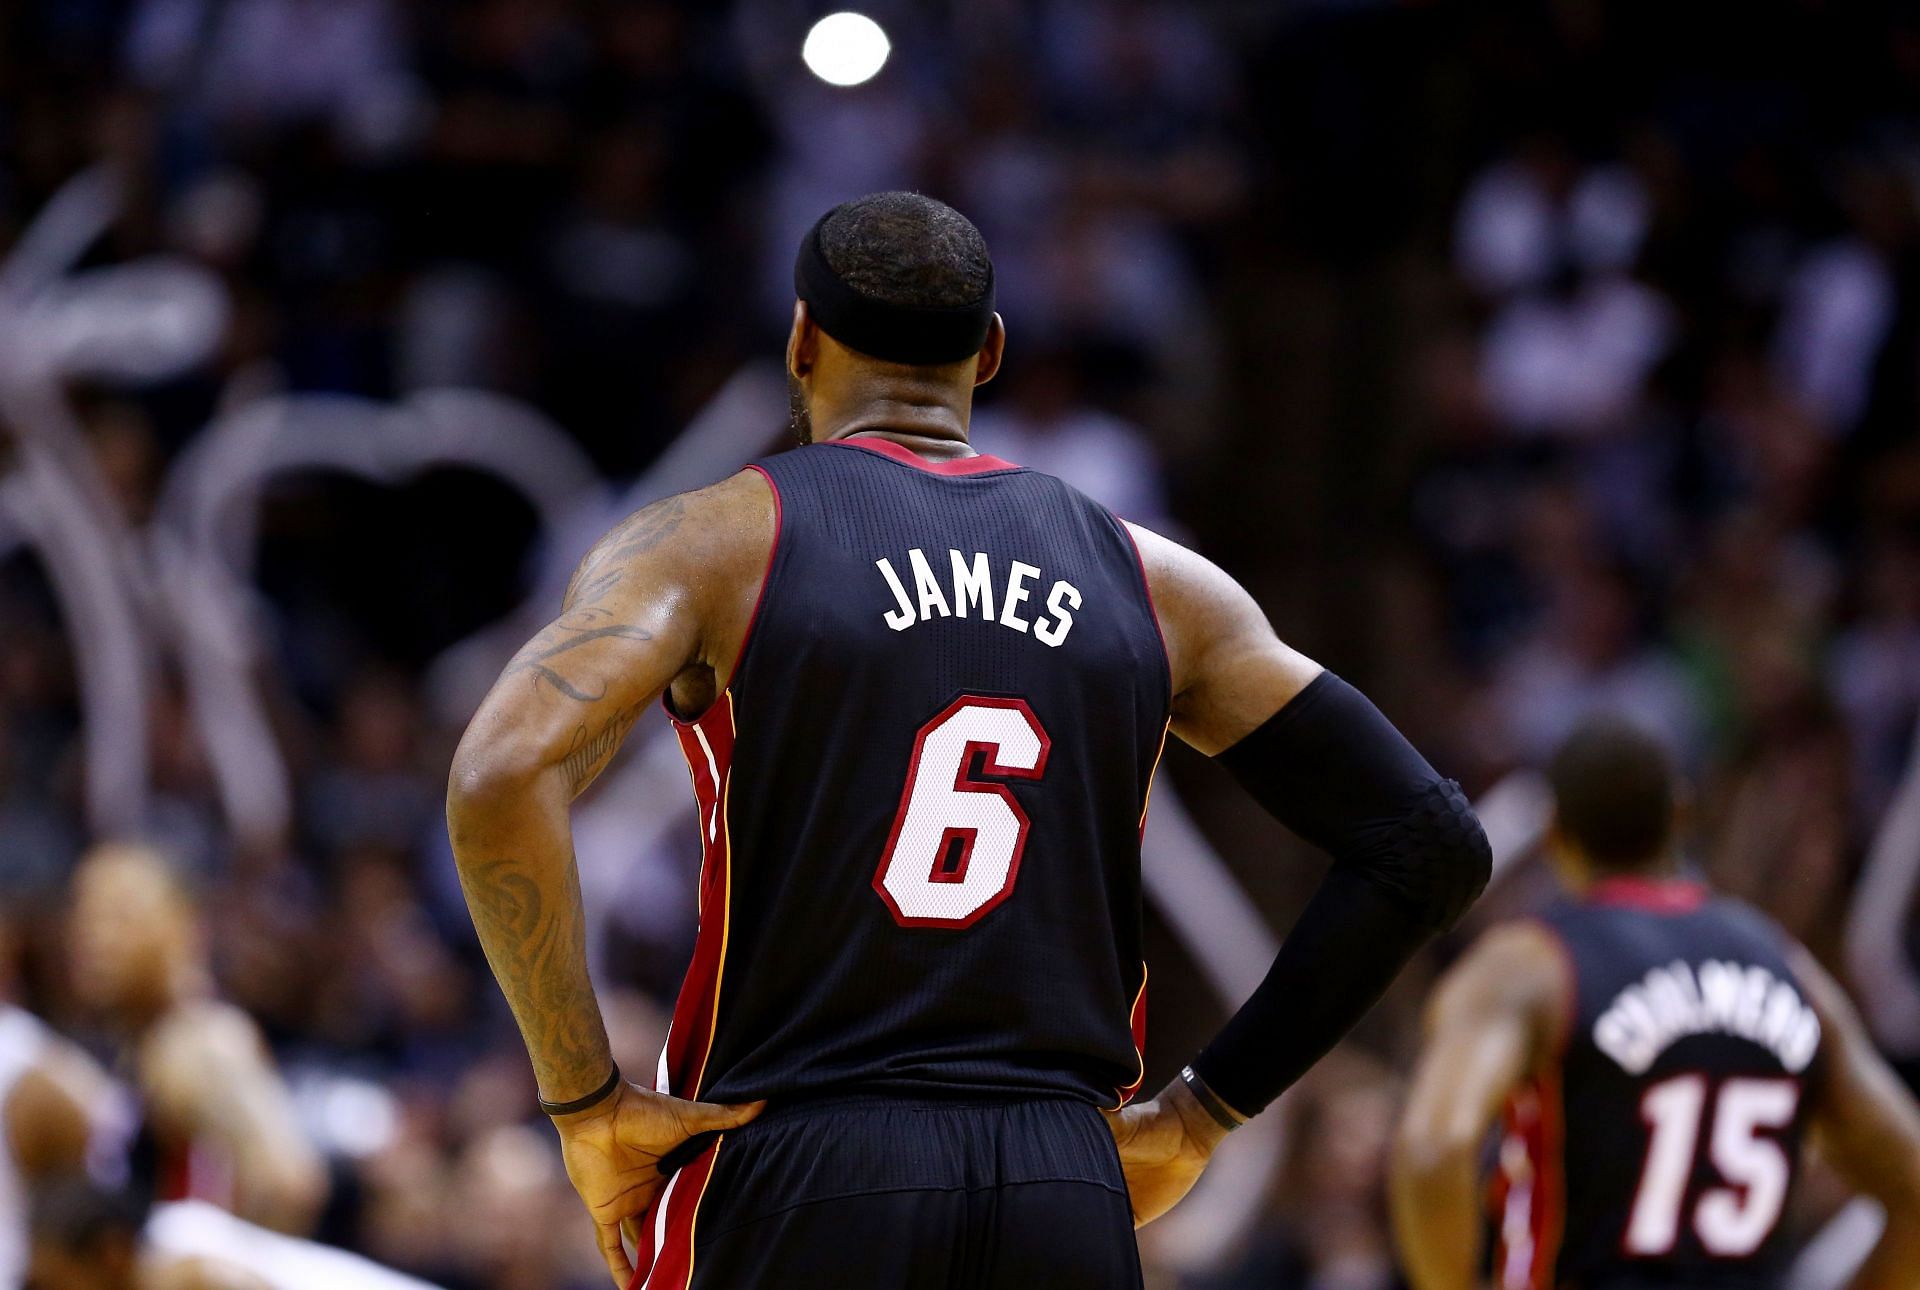 King James wore No. 6 with the Miami Heat.